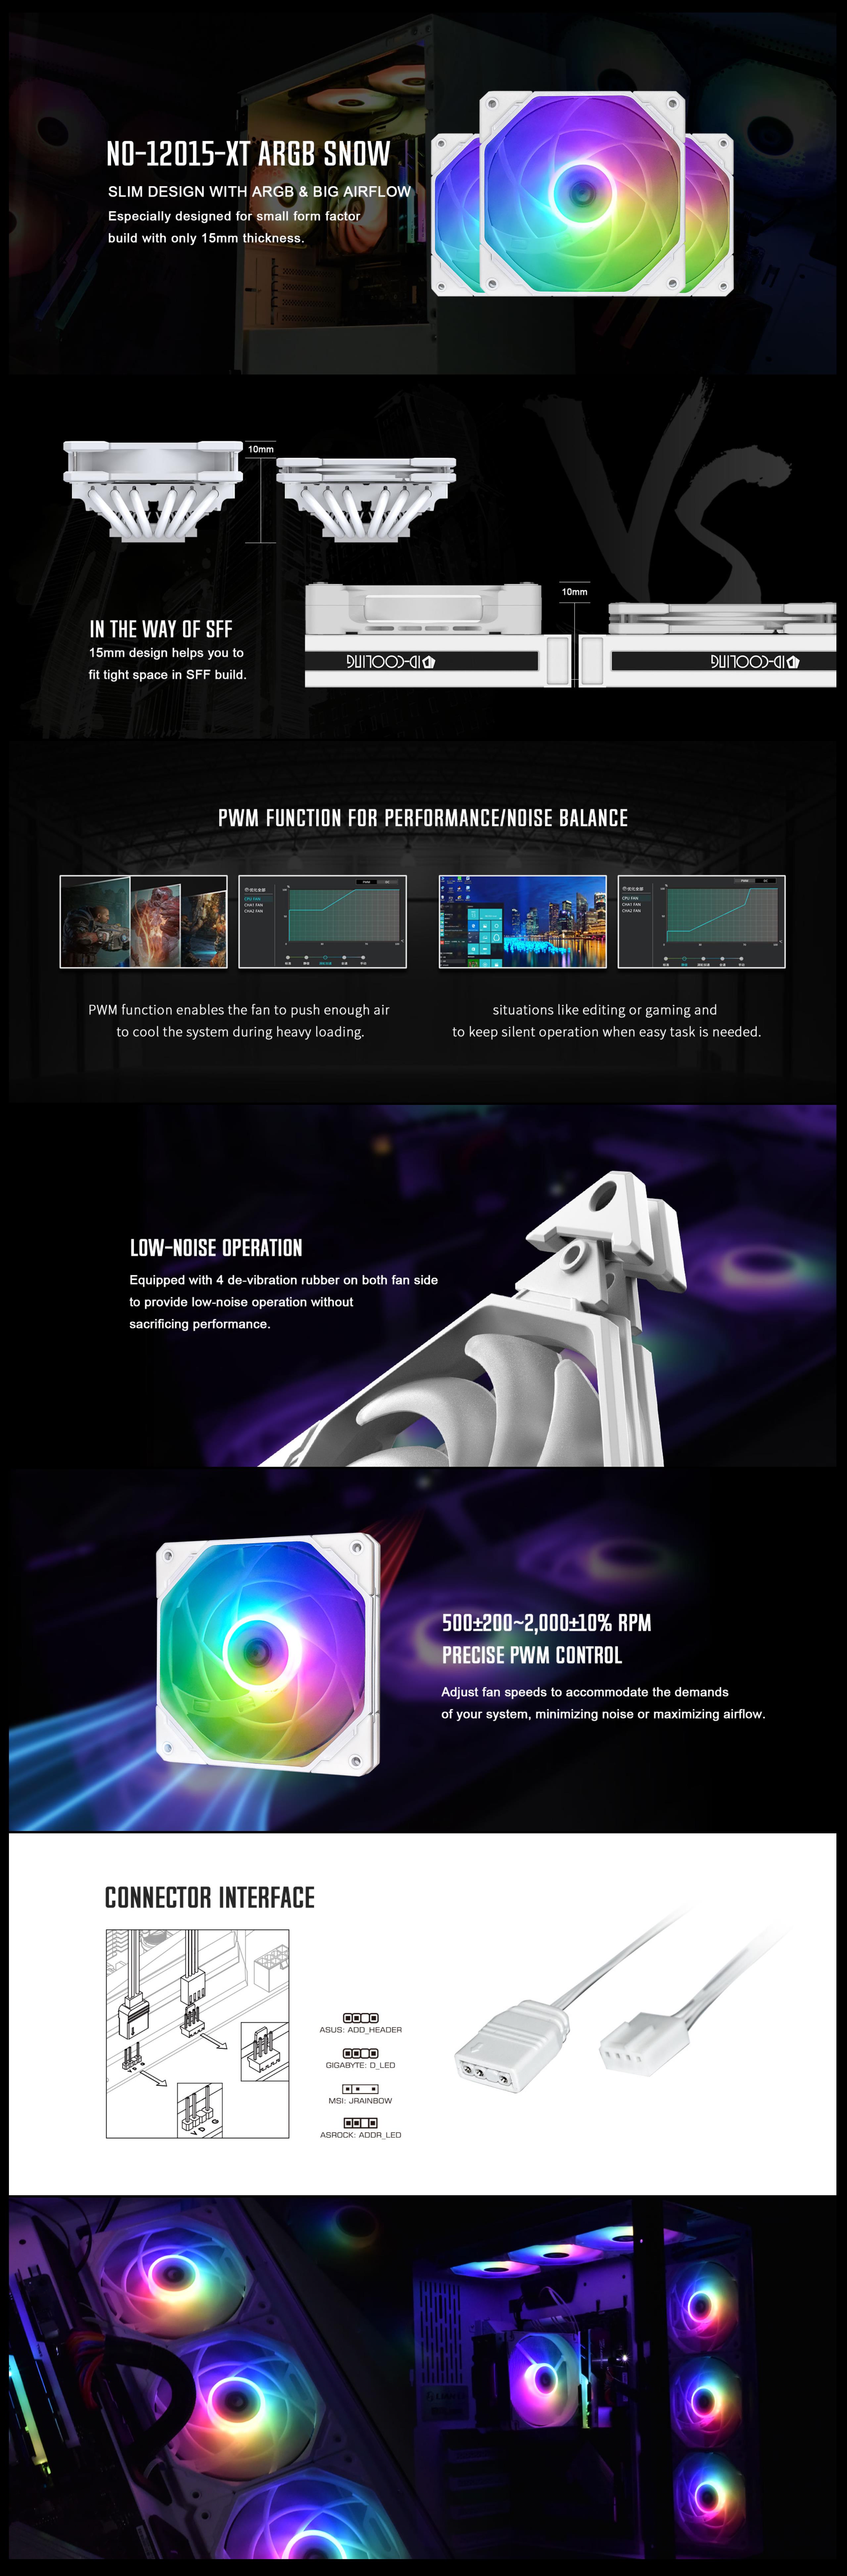 A large marketing image providing additional information about the product ID-COOLING XT Series Ultra Slim 120mm ARGB Case Fan - Snow Edition - Additional alt info not provided